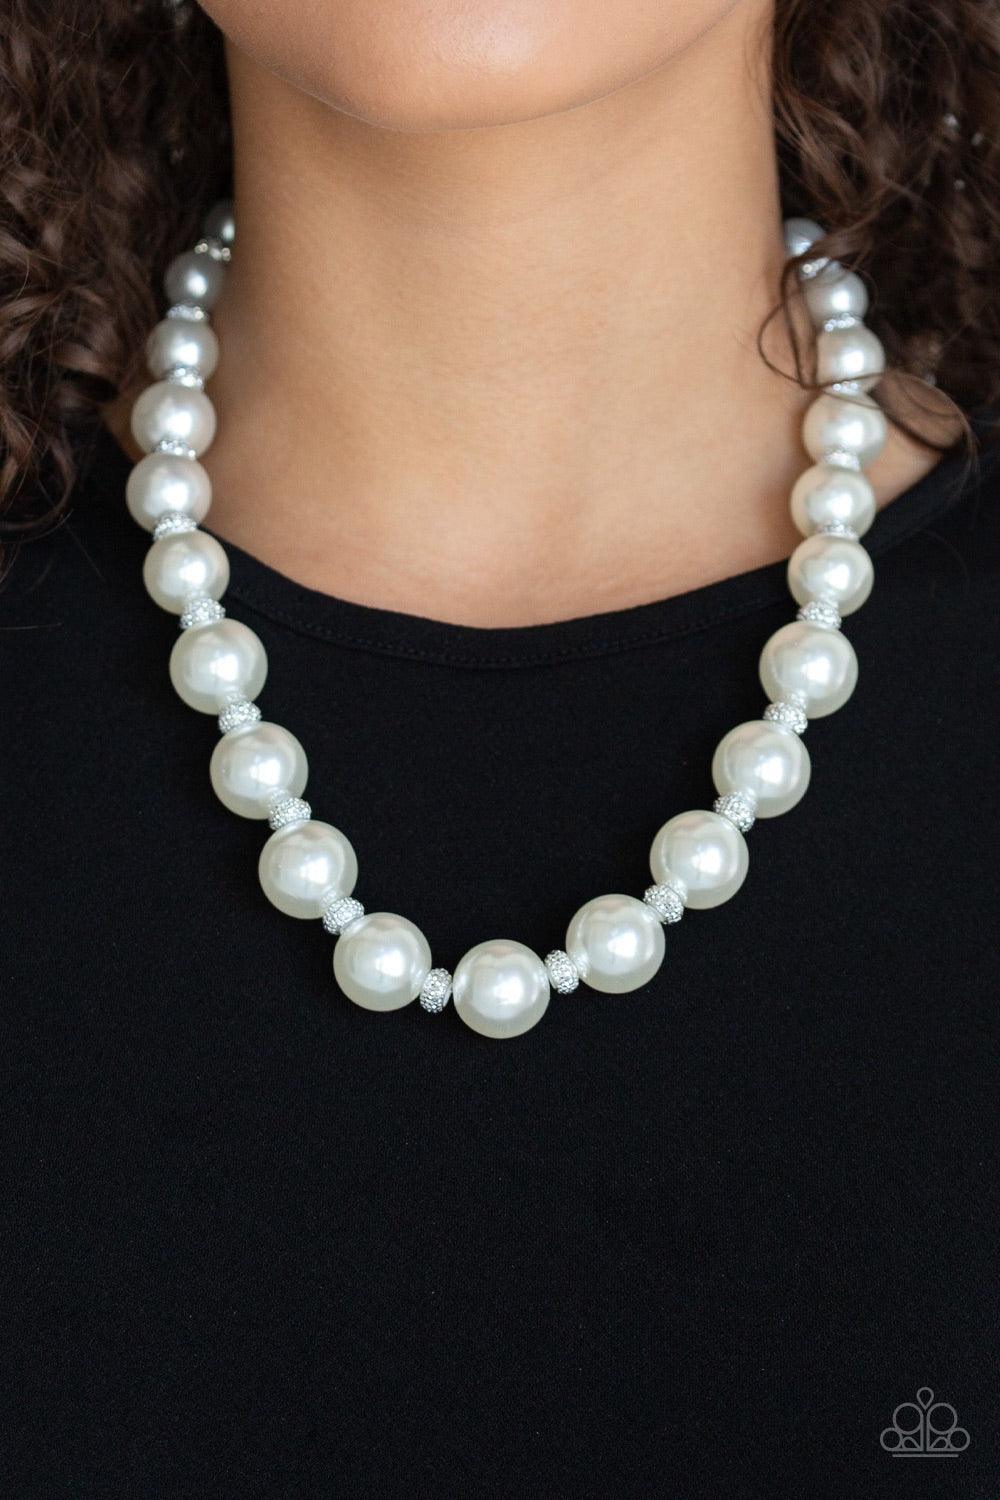 Paparazzi Accessories Uptown Heiress - White Infused with dainty silvery rhinestone encrusted beads, a refined collection of oversized white pearls are threaded along an invisible wire below the collar for a timeless dazzle. Features an adjustable clasp c